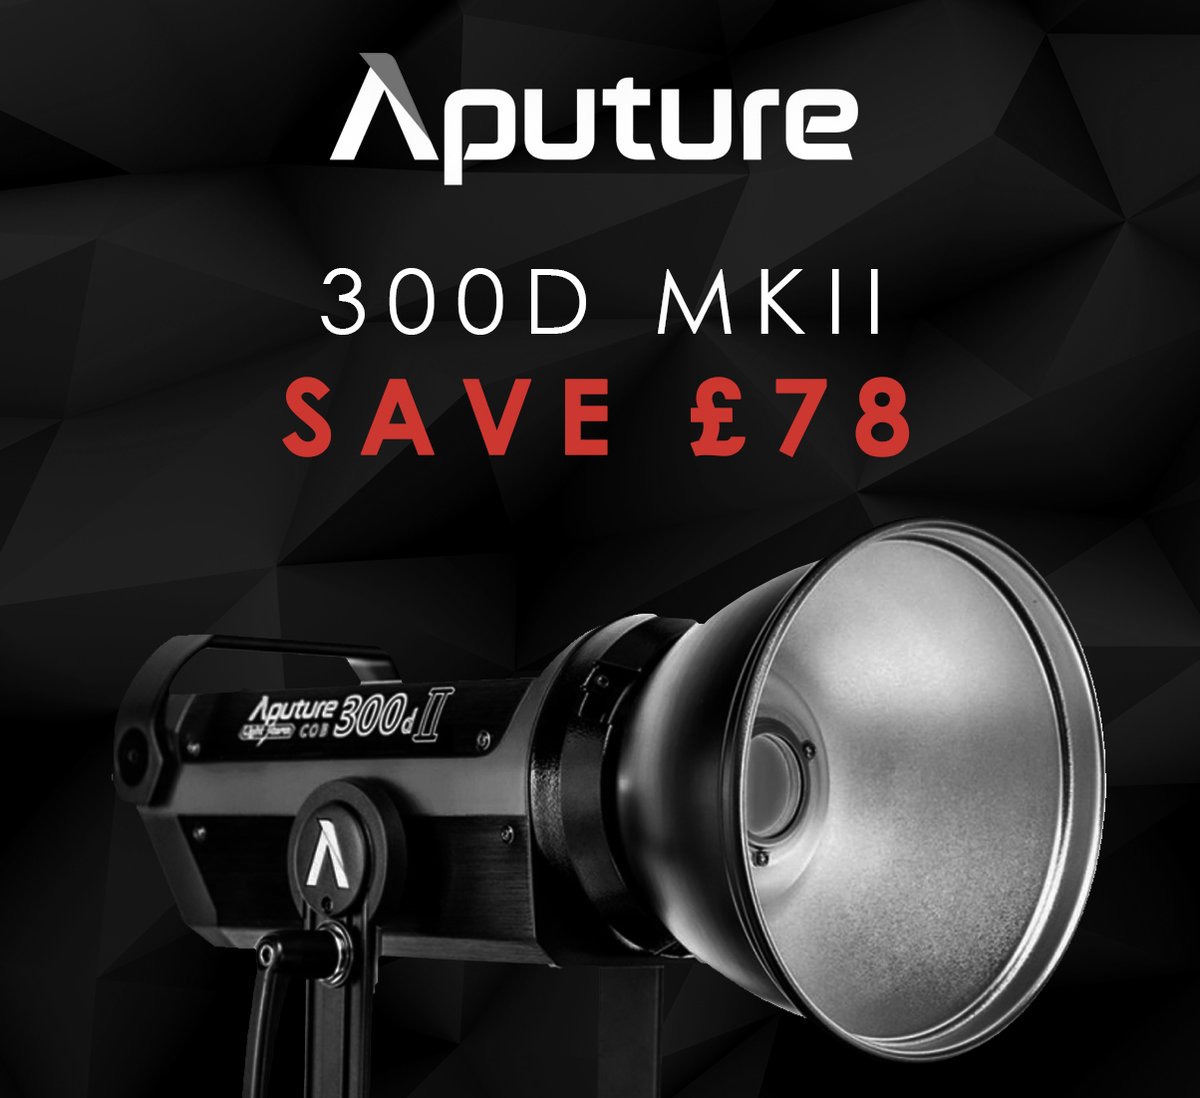 💥 Save £78 on the Aputure 300D MKII! 💥 View deal on our website: bit.ly/3MROsgn